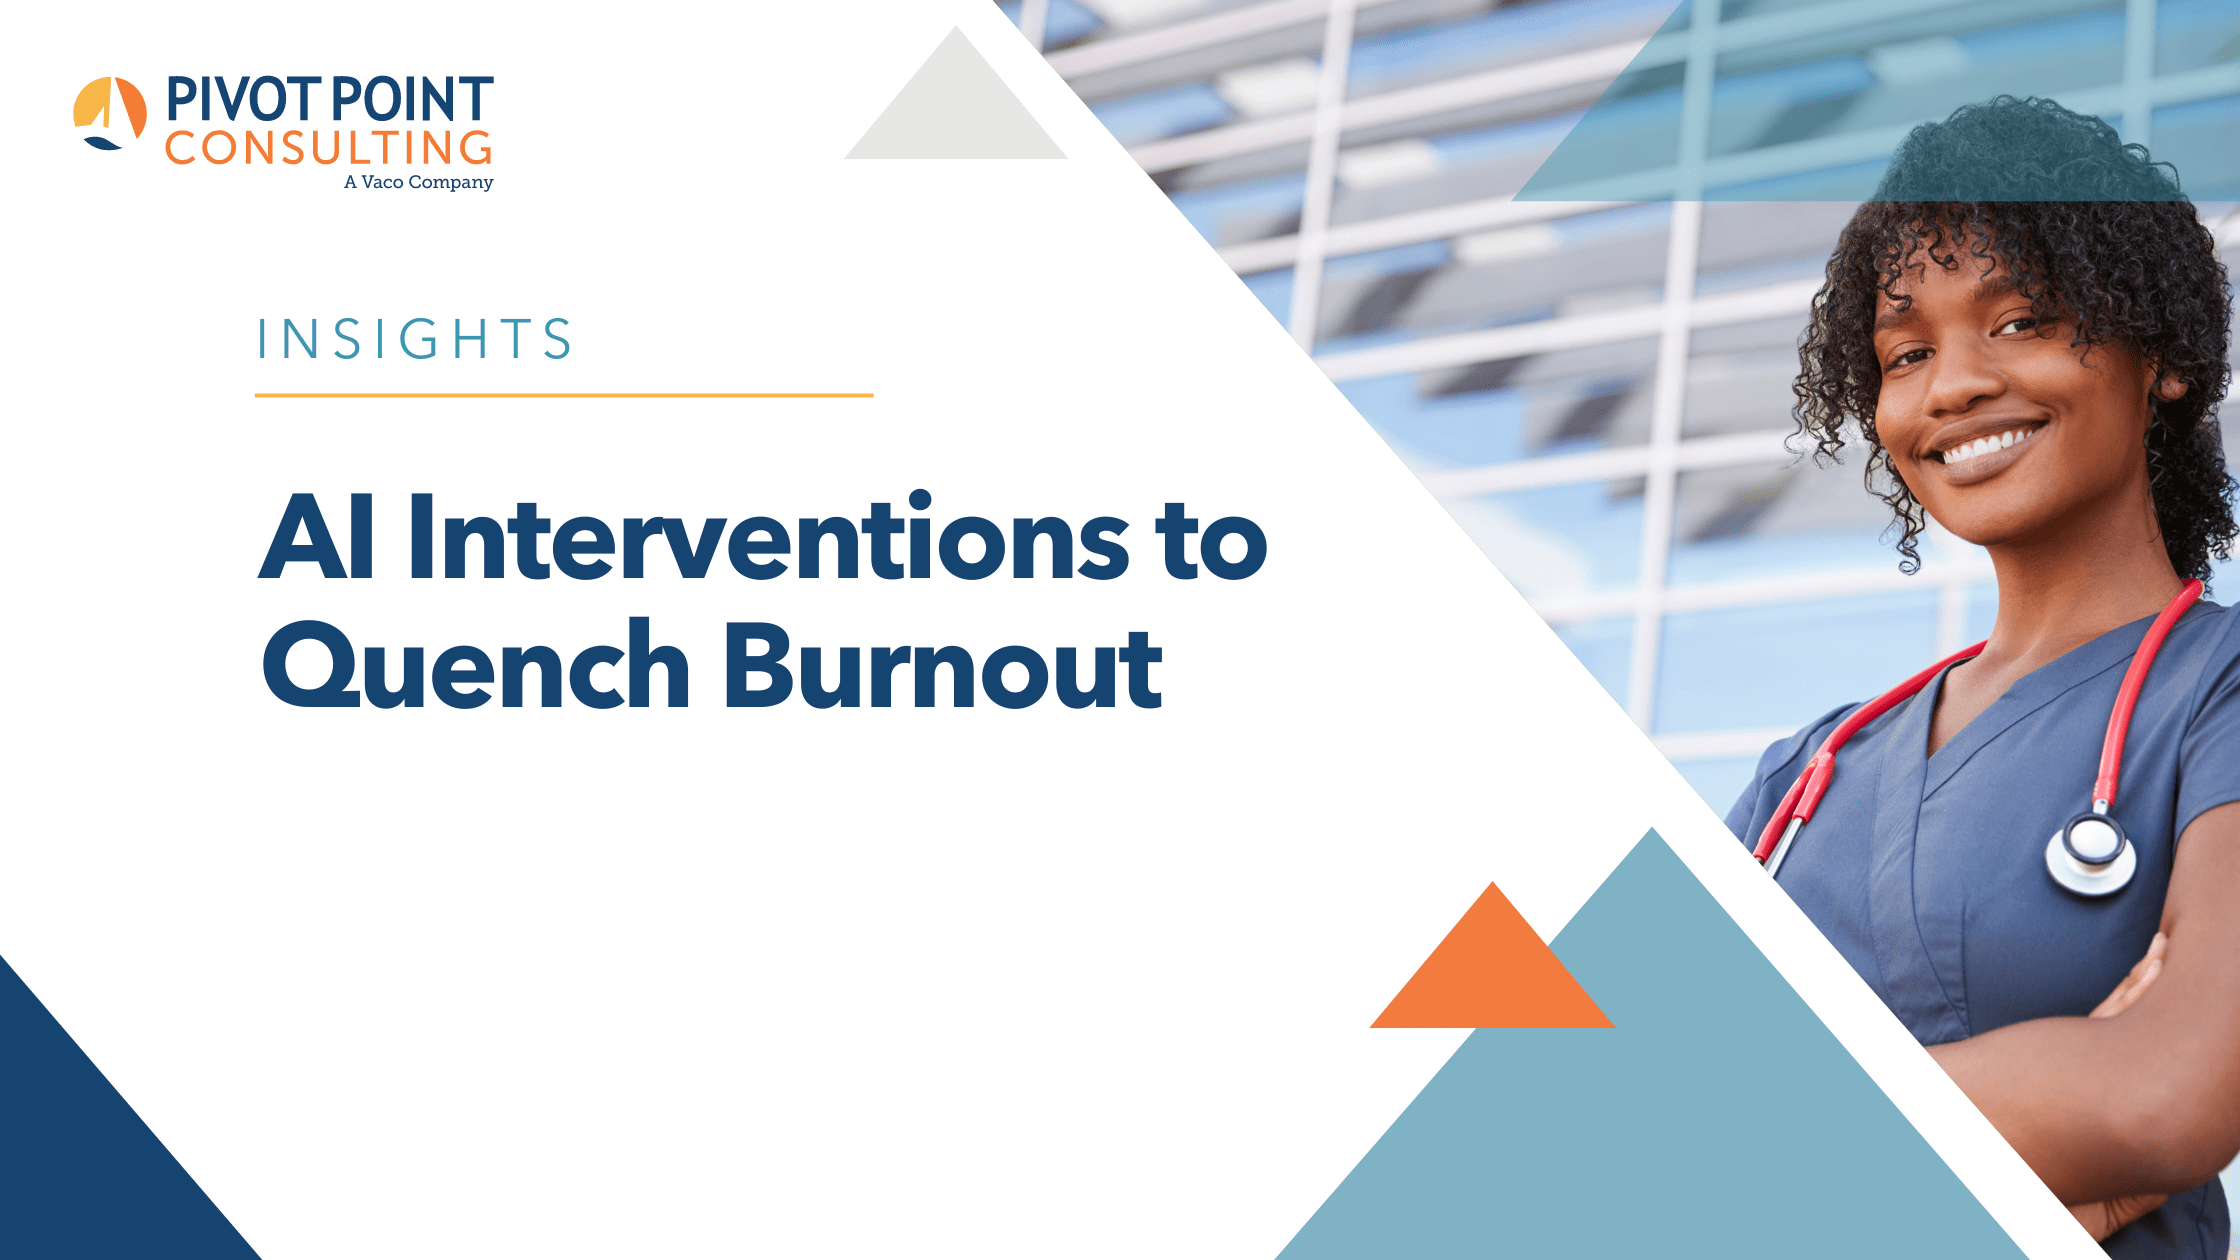 AI Interventions to Quench Burnout blog post